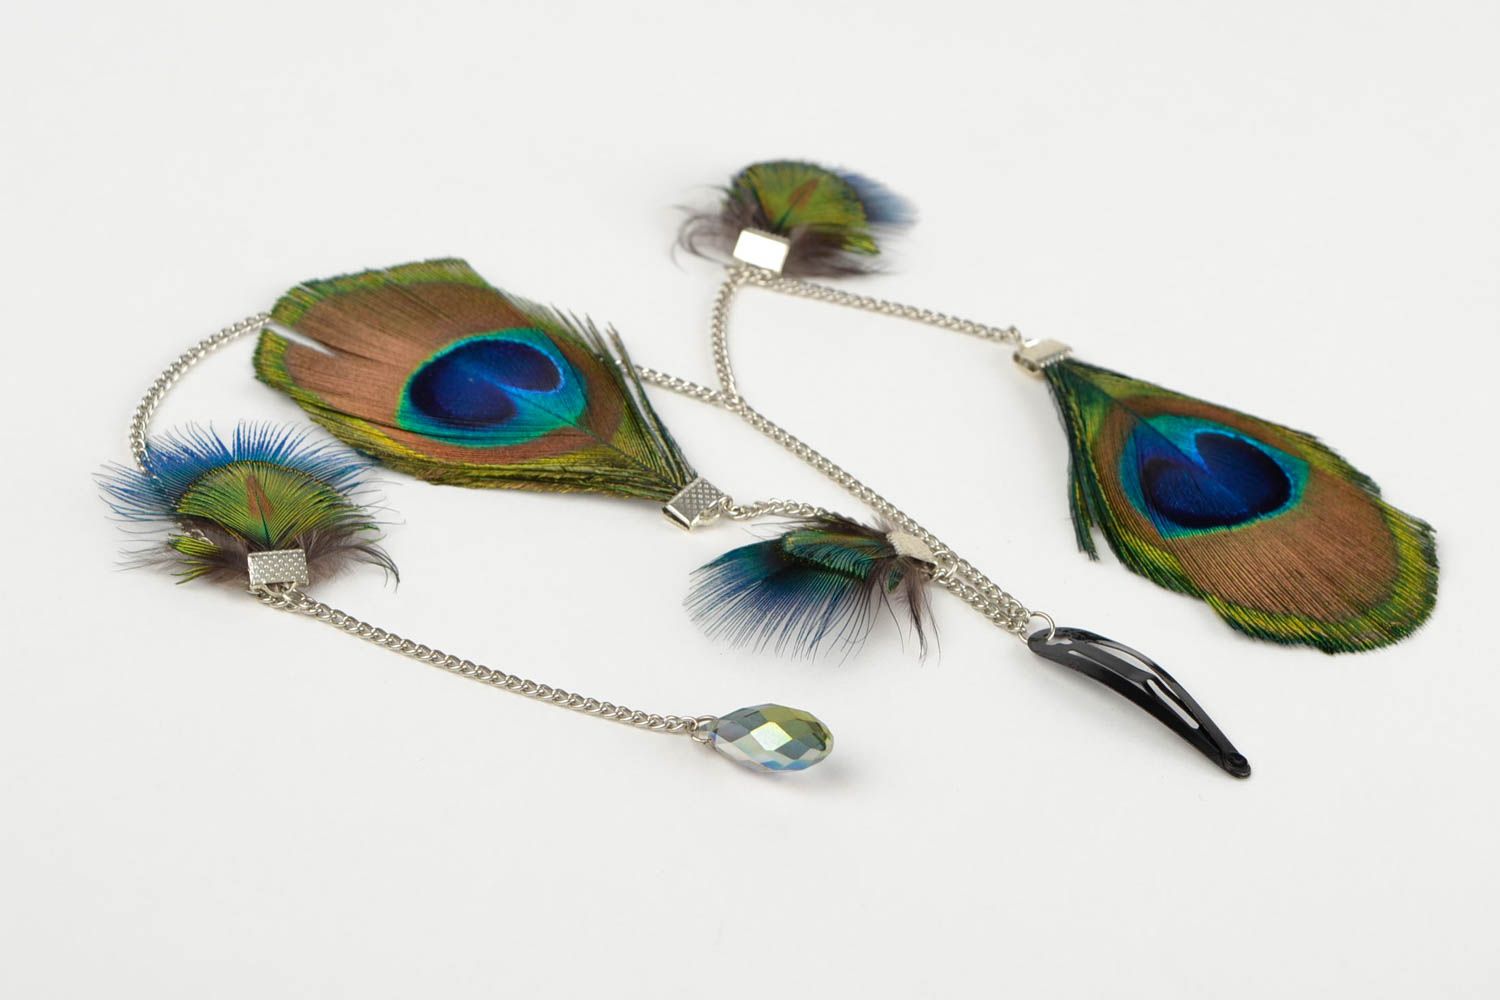 Handmade peacock feather hair accessory unique designer jewelry stylish hair pin photo 5